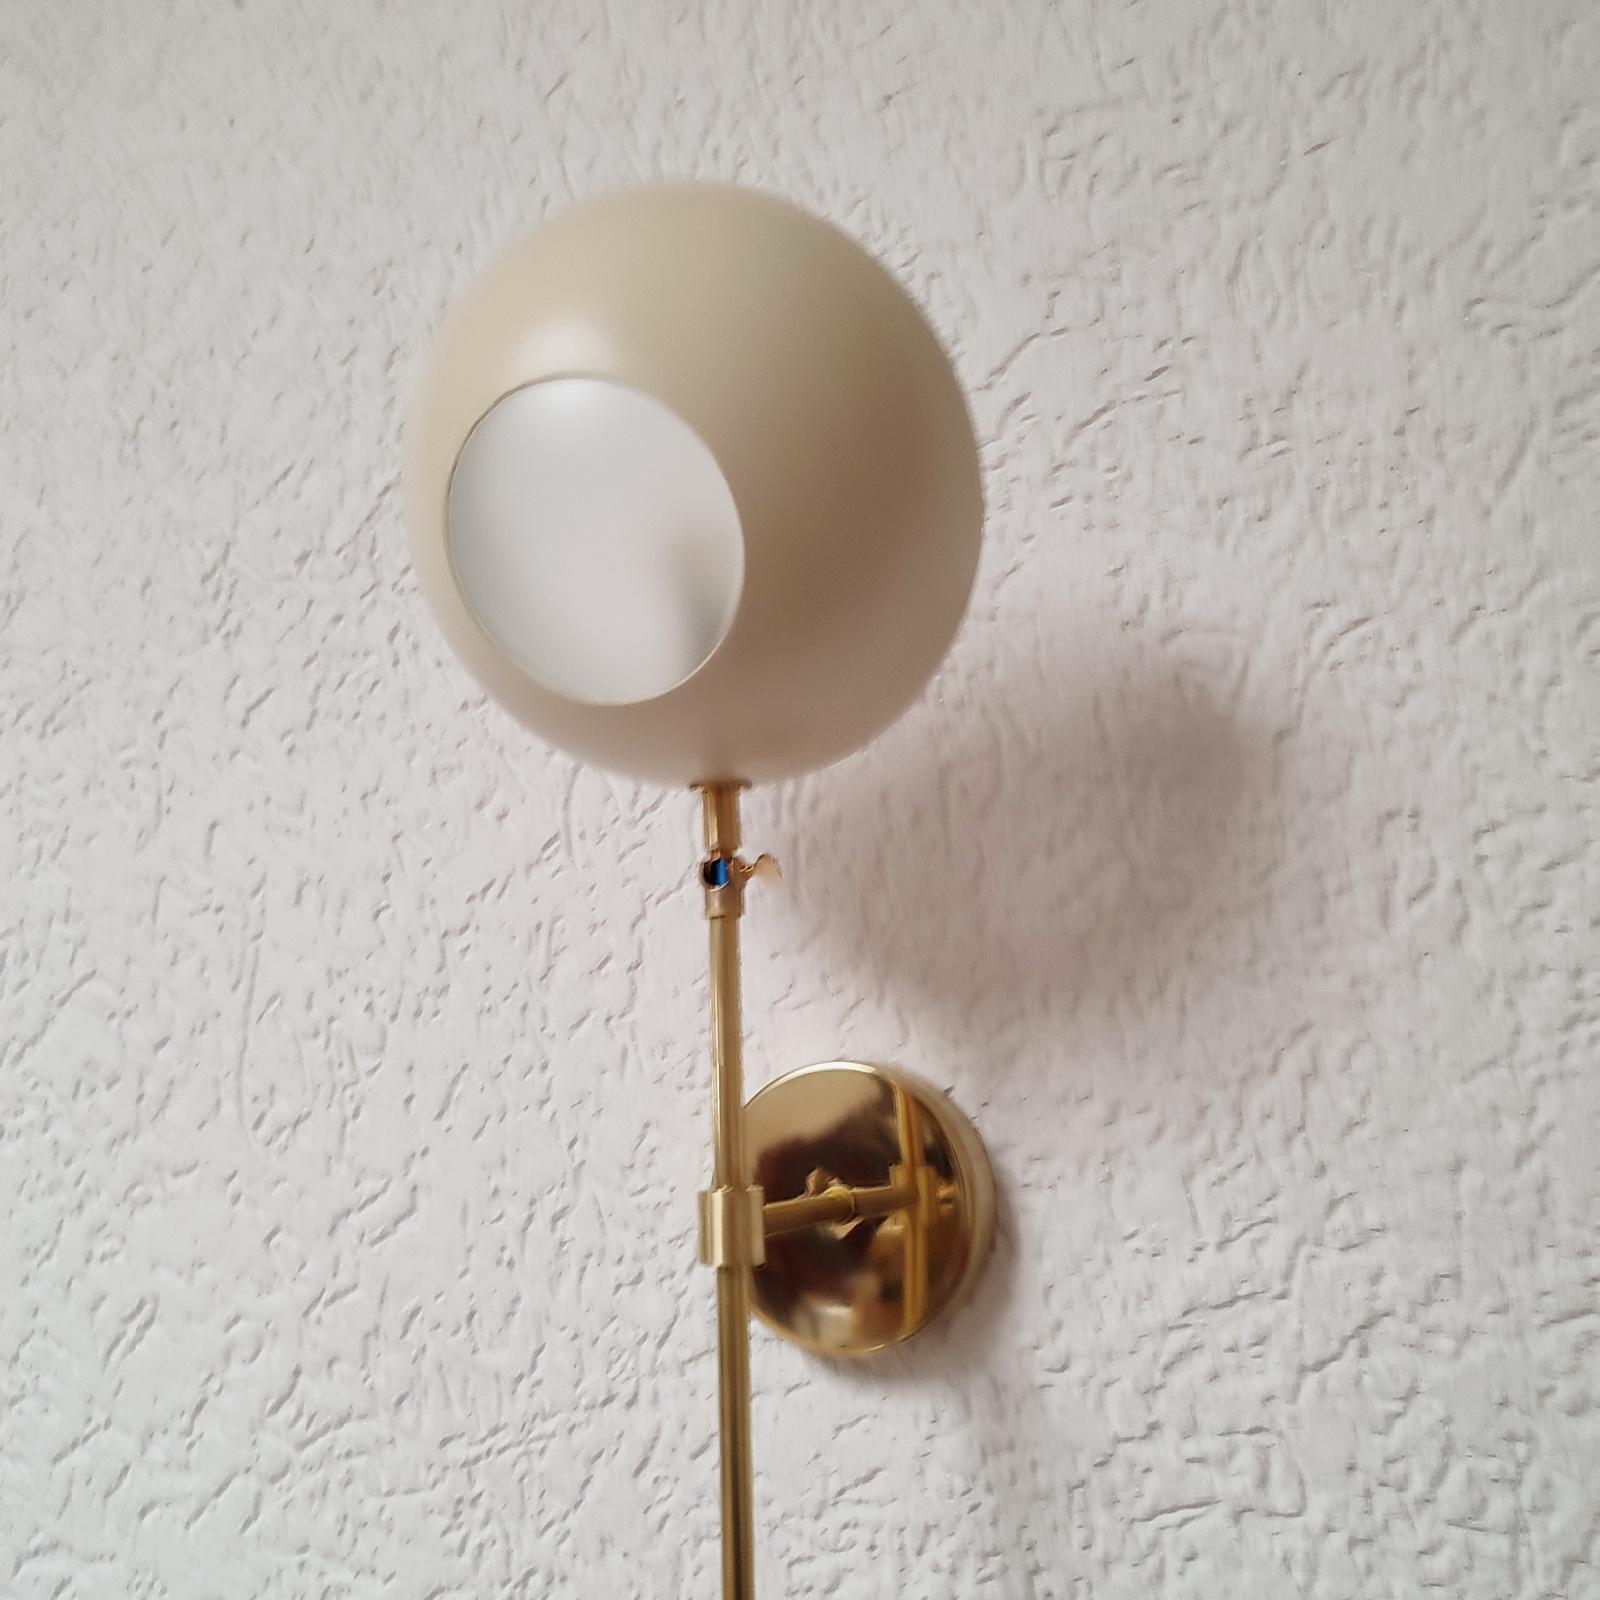 Contemporary Pair of Italian Wall Lights, Brass and Ivory Lacquer, Stilnovo Style For Sale